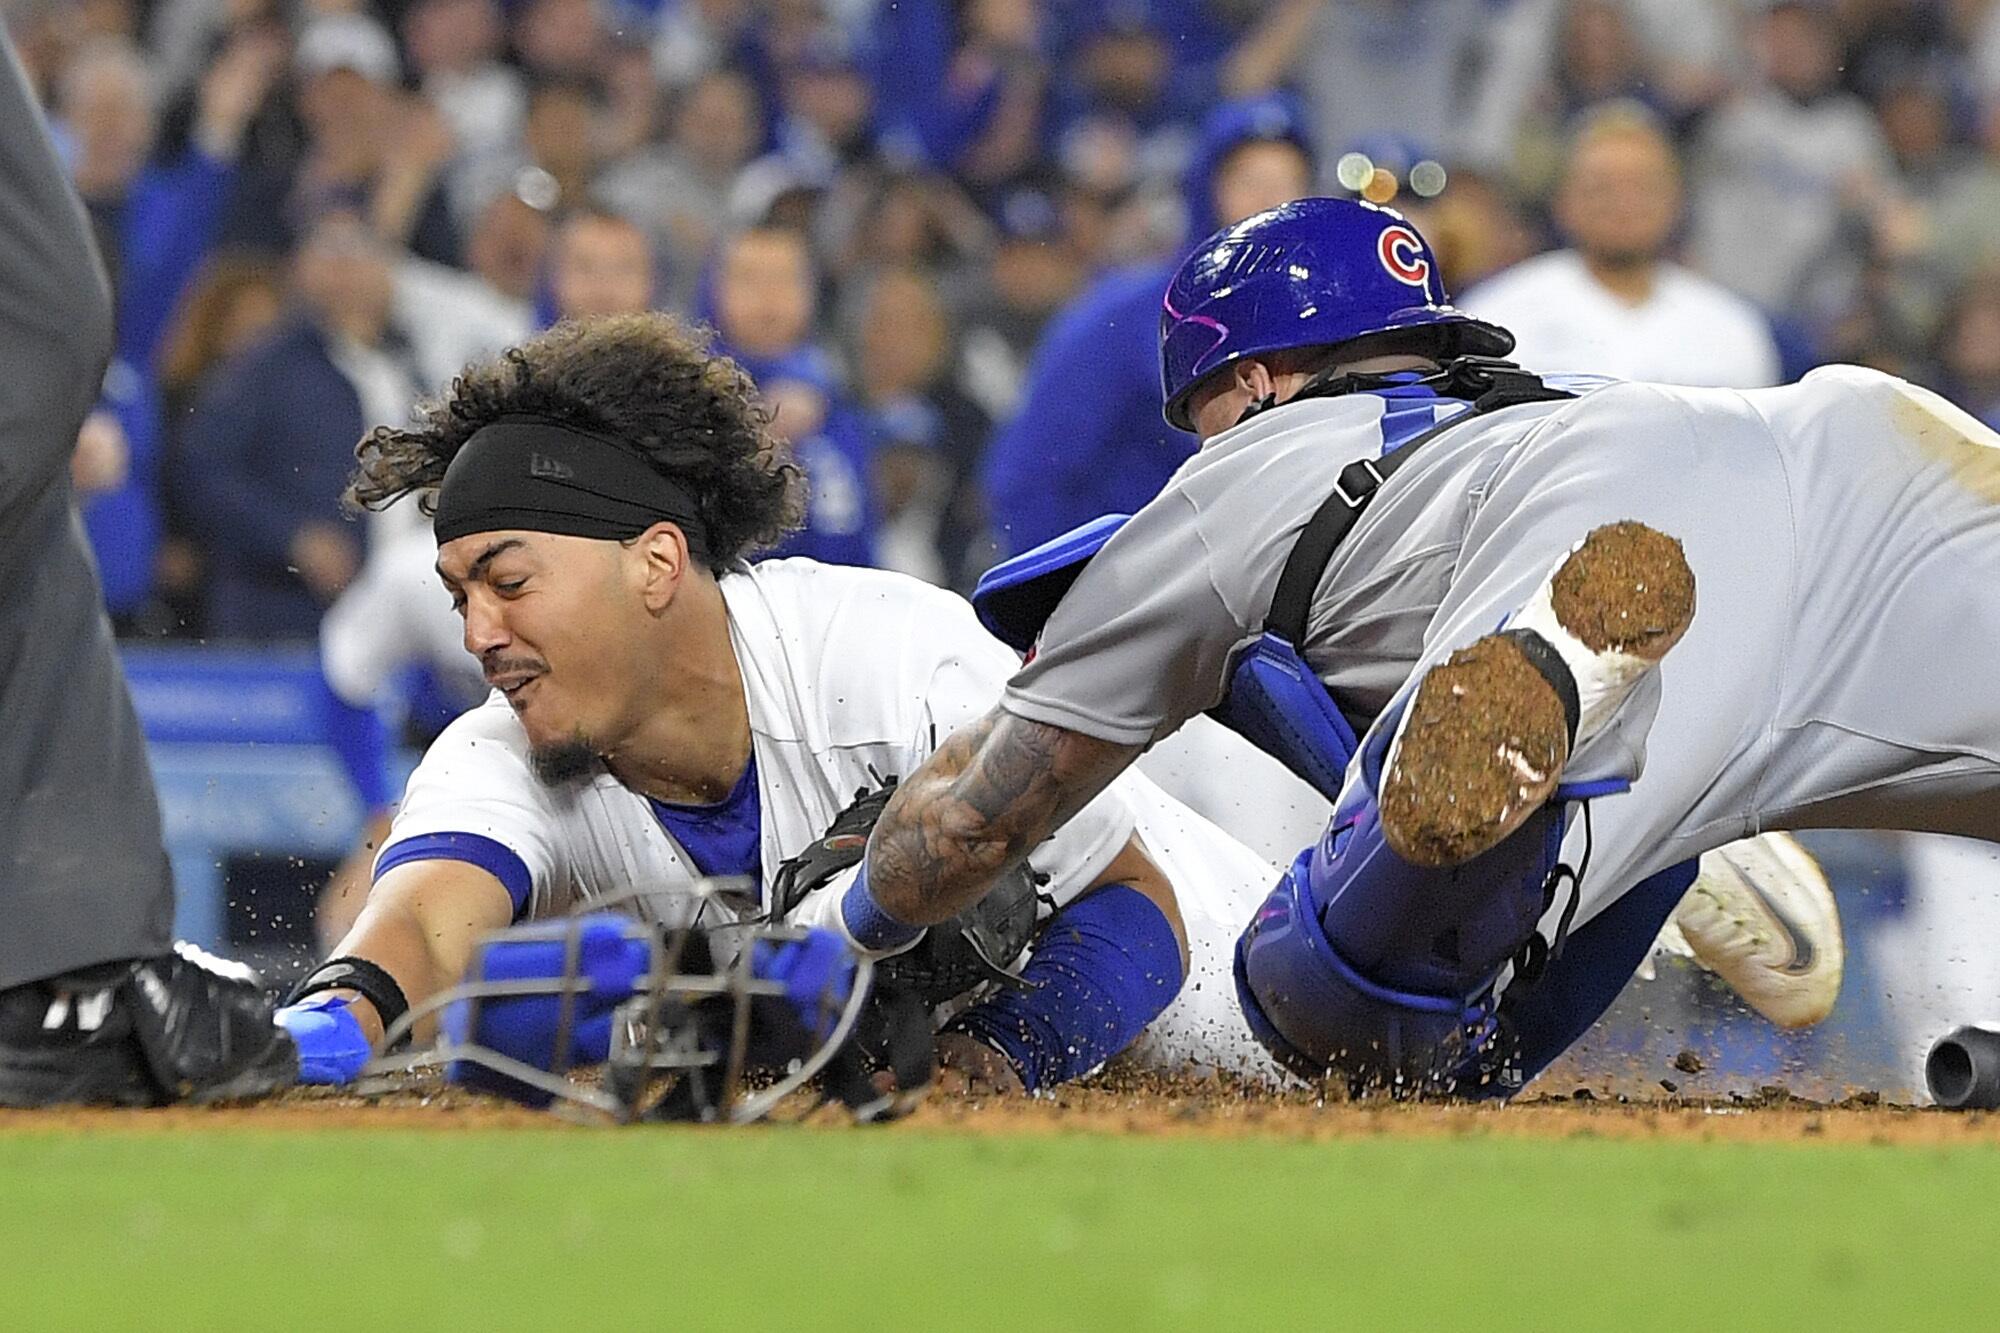 Miguel Vargas, left, slides into home plate to score the winning run in the Dodgers' 2-1 walk-off victory Saturday night.